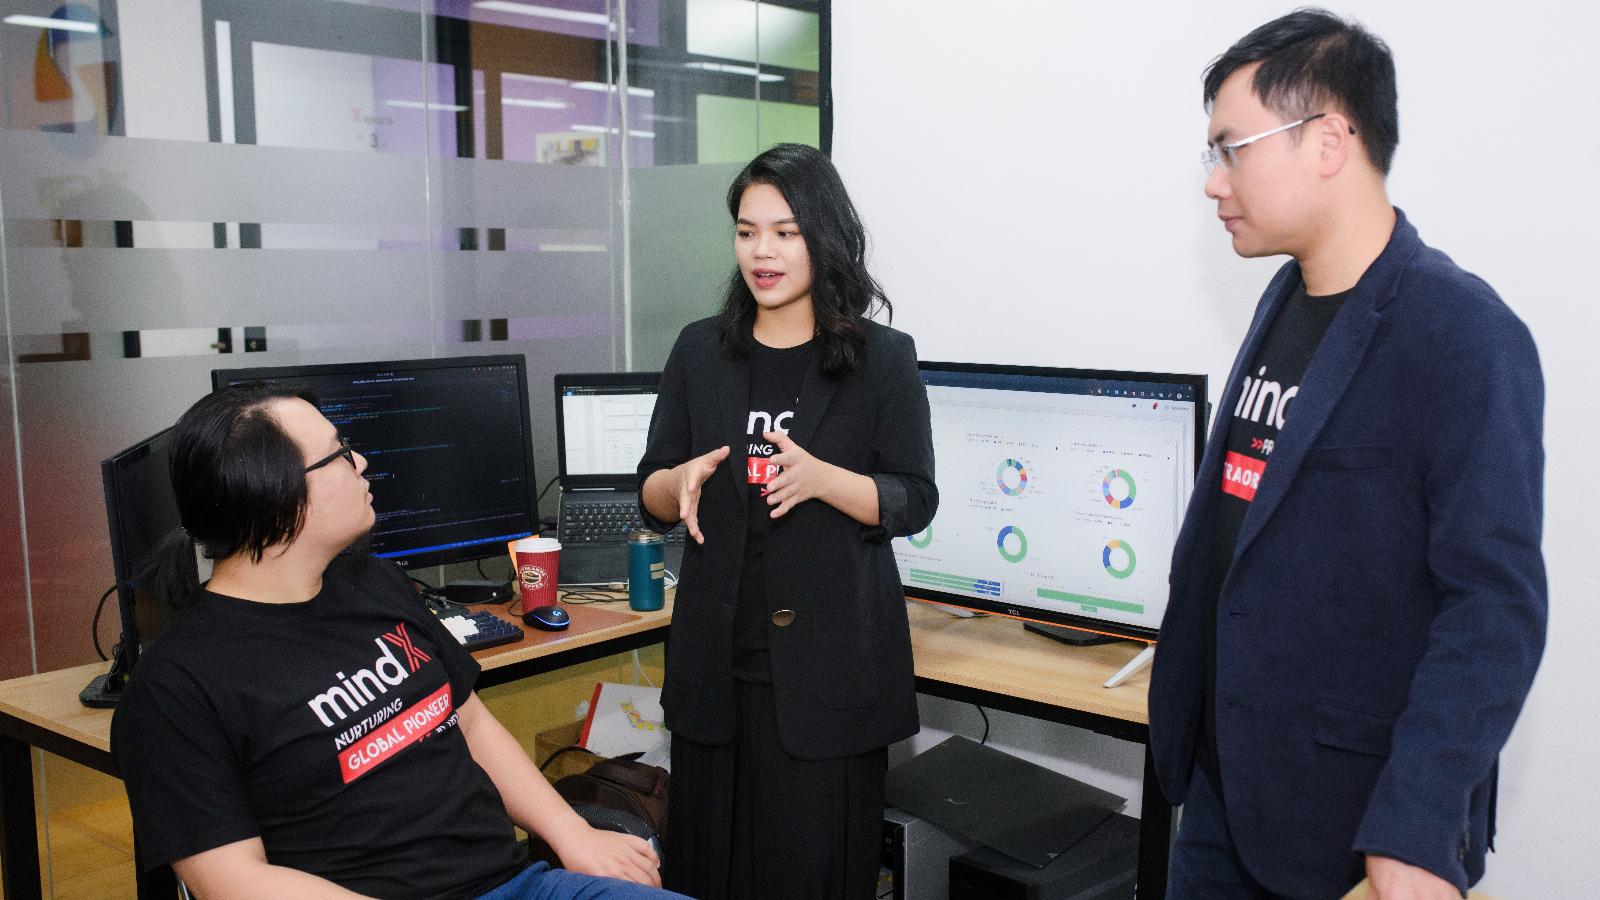 Edtech MindX wants to build ‘little Silicon Valleys’ across Vietnam